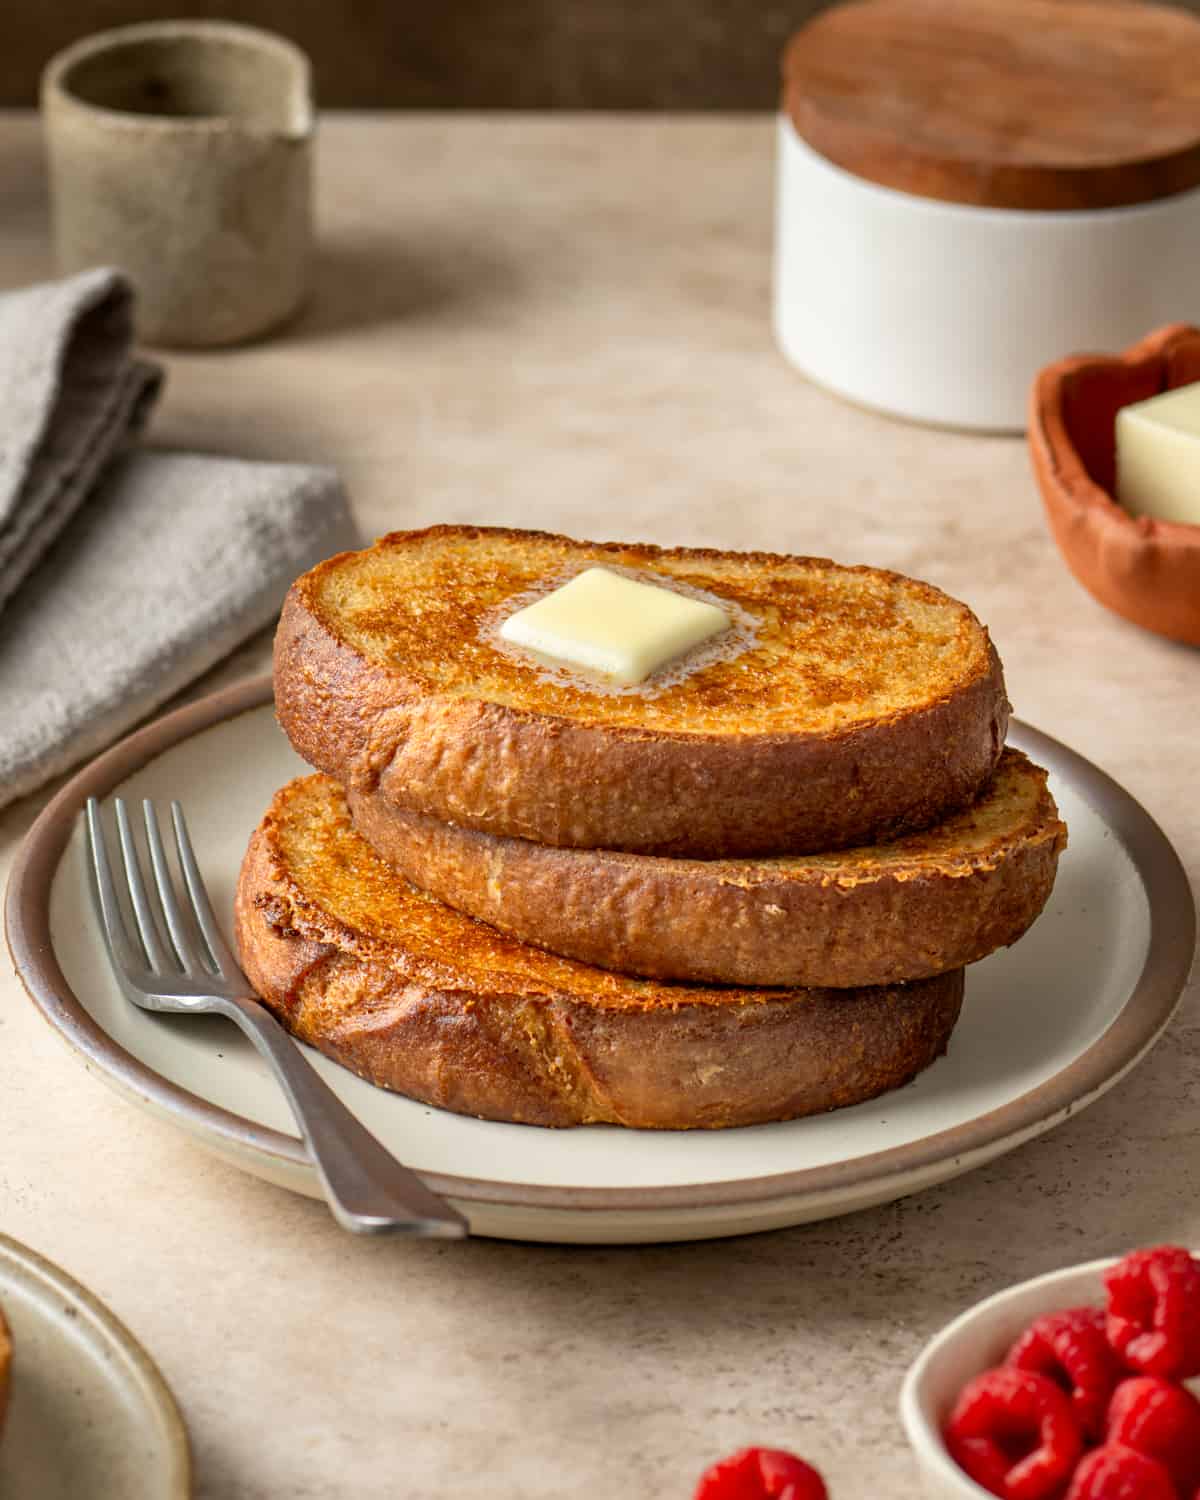 Side view of stack of french toast with a pat of butter.